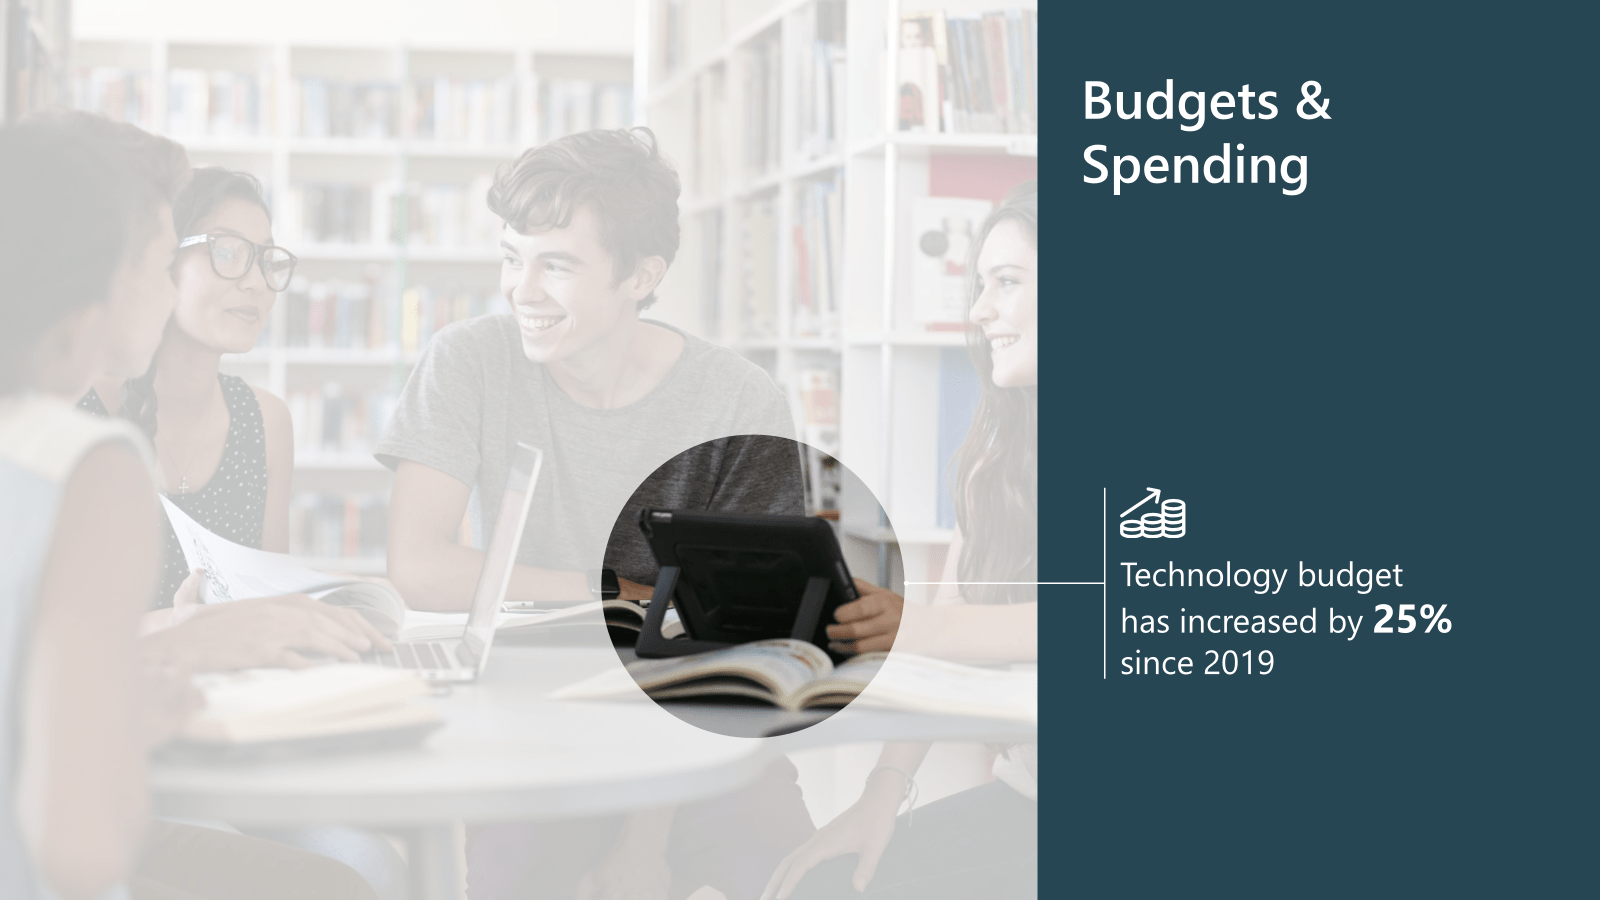 PowerPoint slide with the title Budget and Spending. There is an image of a group of students studying, one had a tablet. The image is faded back but the tablet is visible through a cut out. 